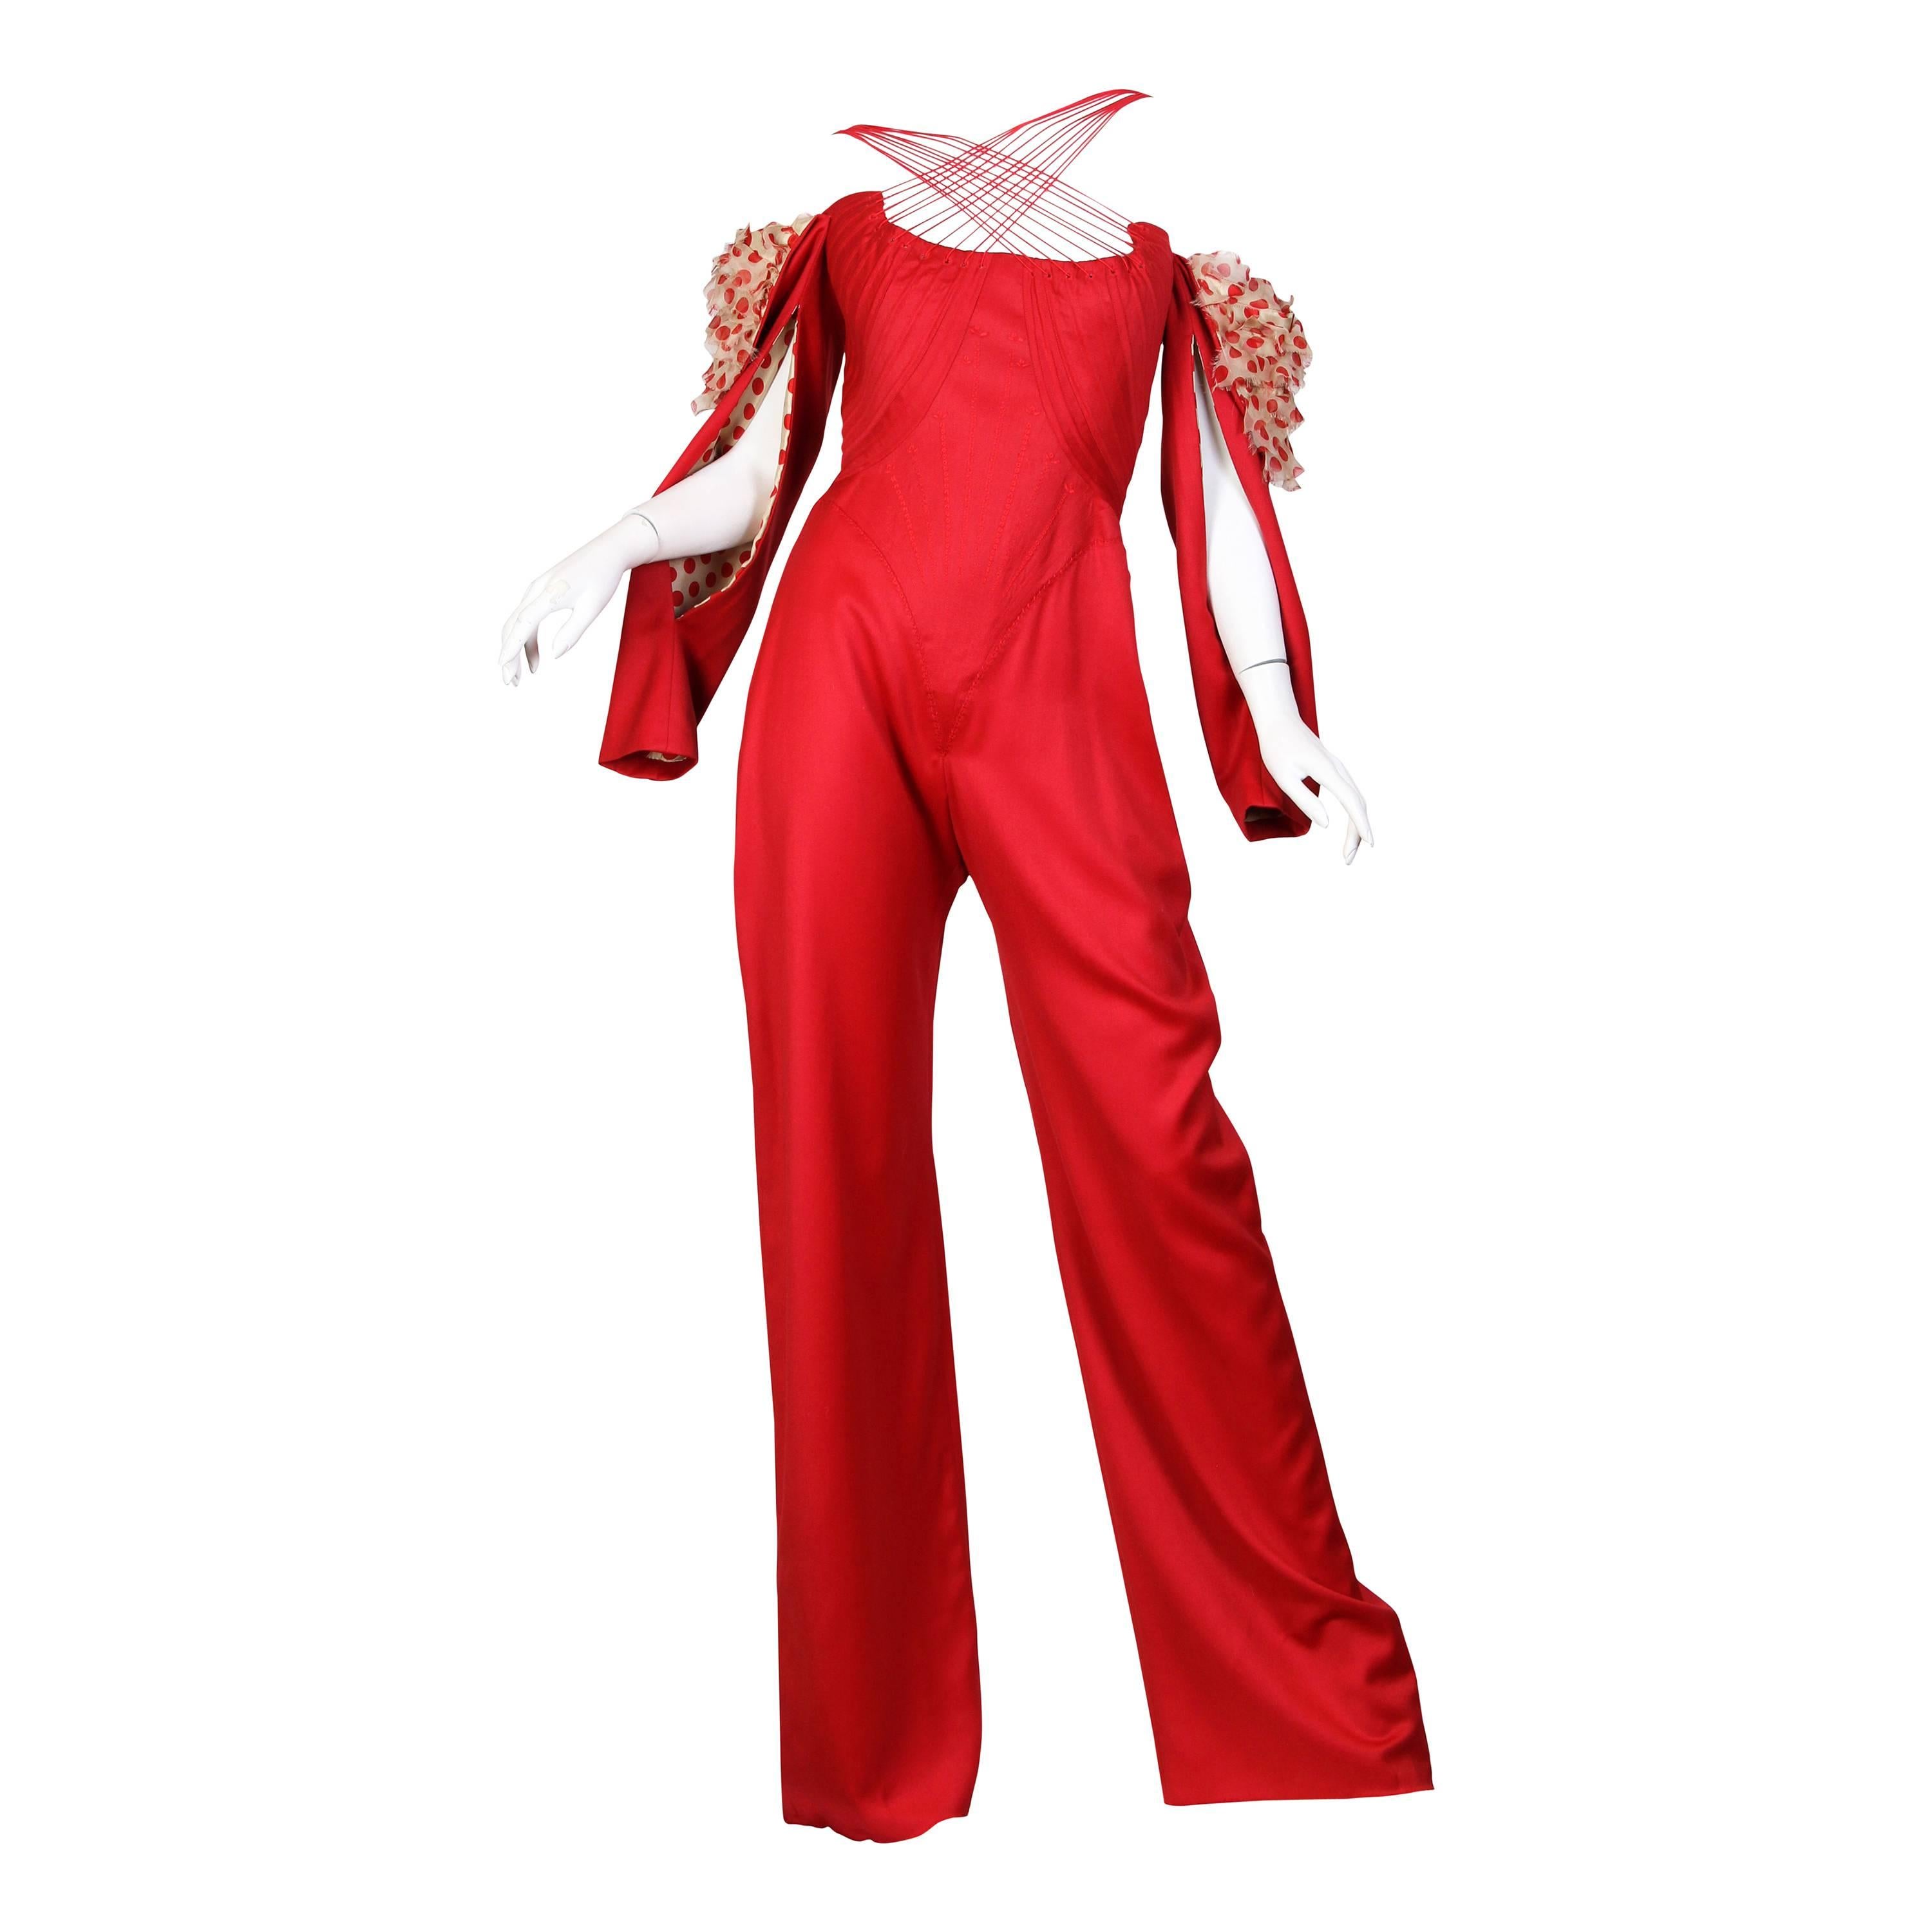 1990S ALEXANDER MCQUEEN Style Red Cotton Spring 2002 "Dance Of The Twisted Bull